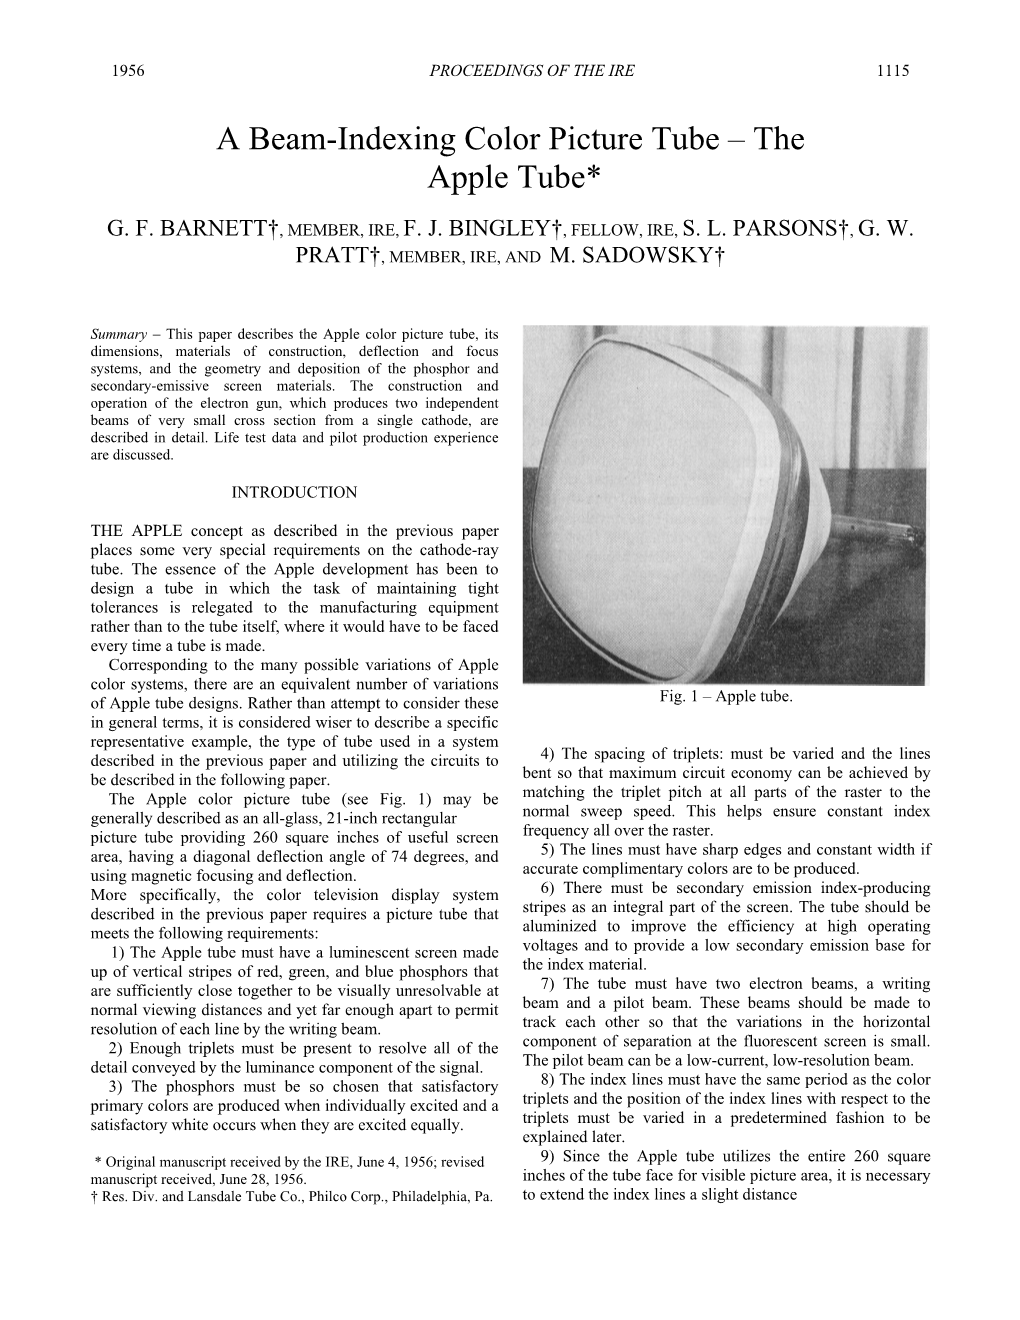 A Beam-Indexing Color Picture Tube – the Apple Tube*